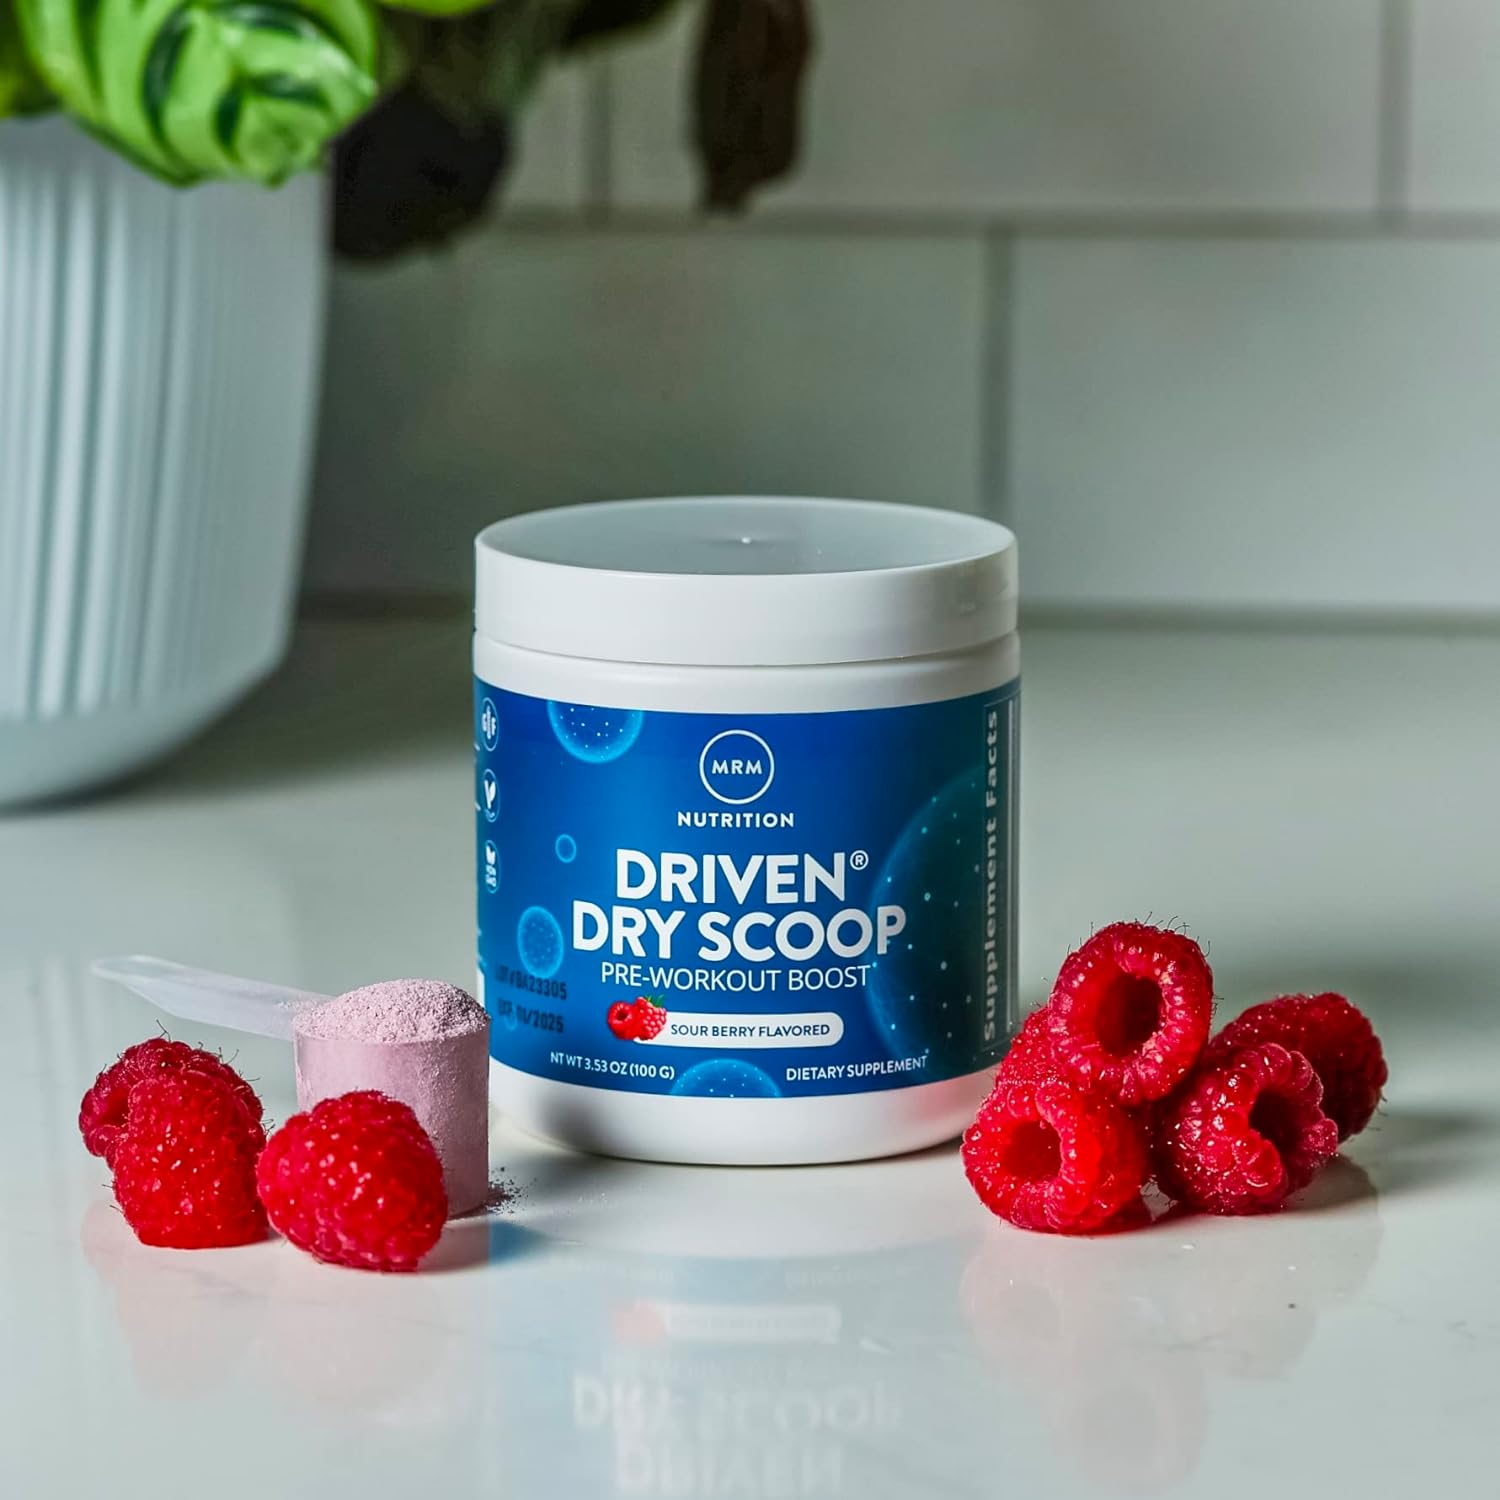 MRM Nutrition Driven™ Dry Scoop Pre-Workout Powder| Sour Berry Flavore